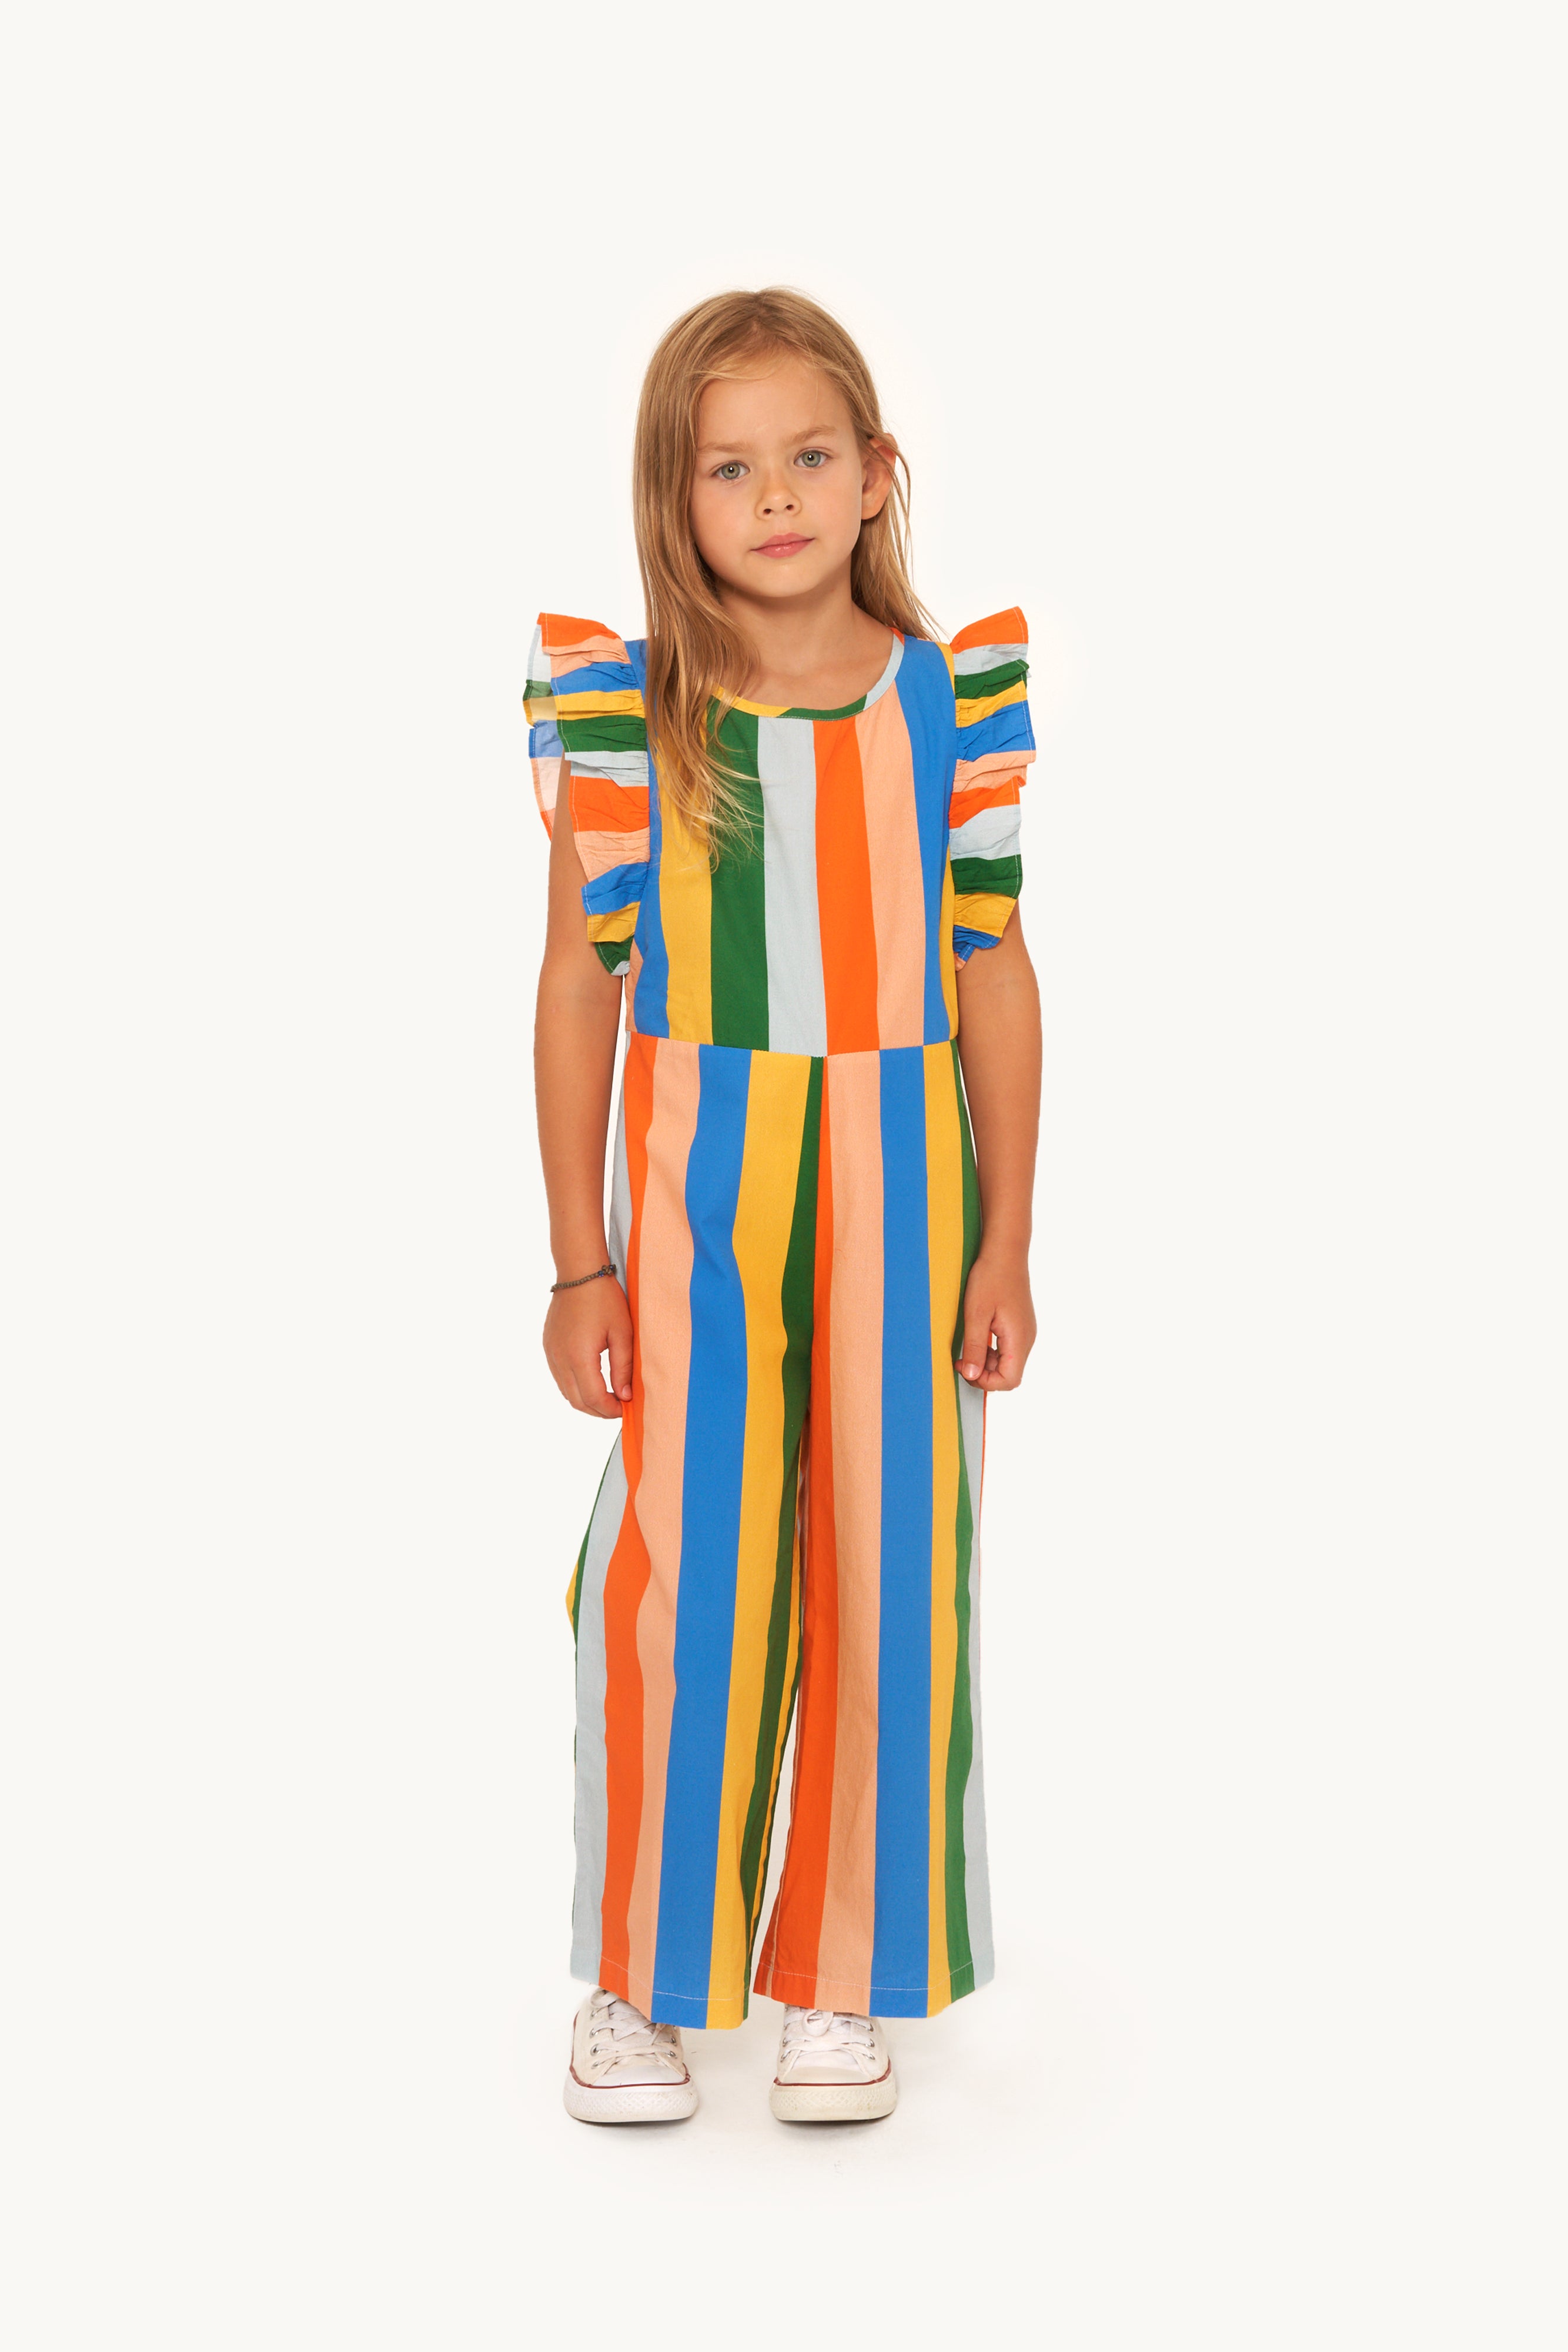 Tinycottons Multicolour Stripes Overalls